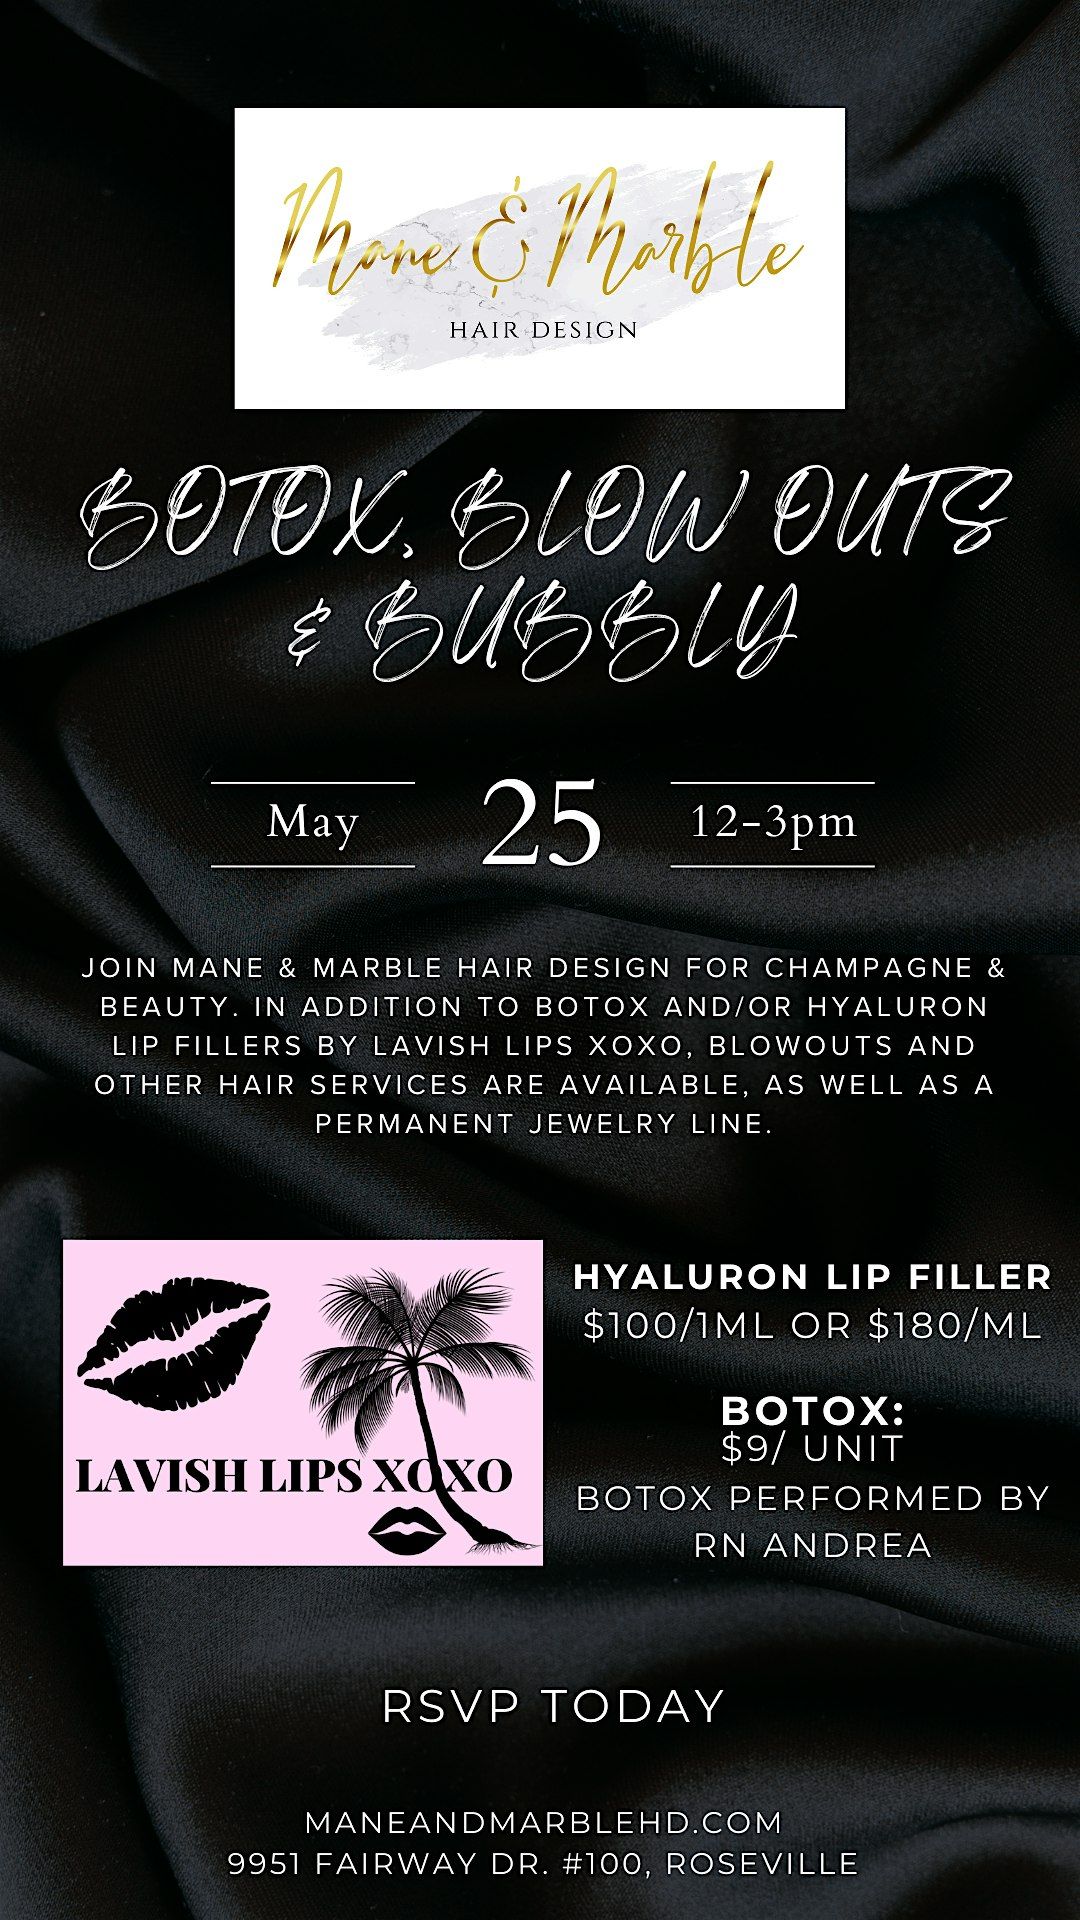 Botox, Blow outs & Bubbly